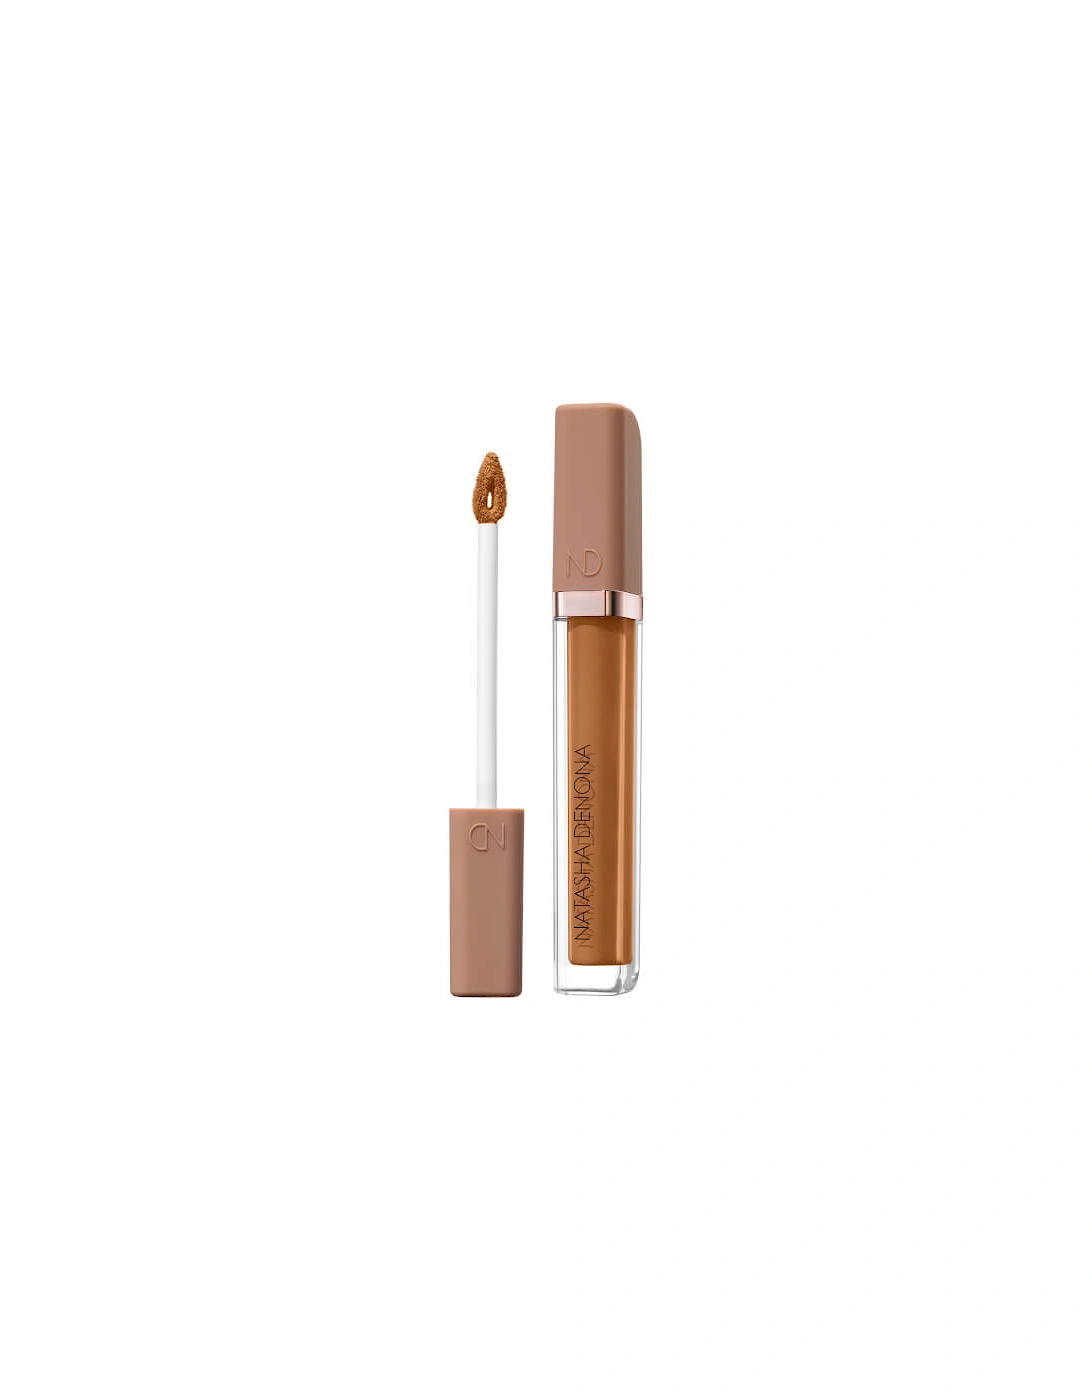 Hy-Glam Concealer - NY12, 2 of 1